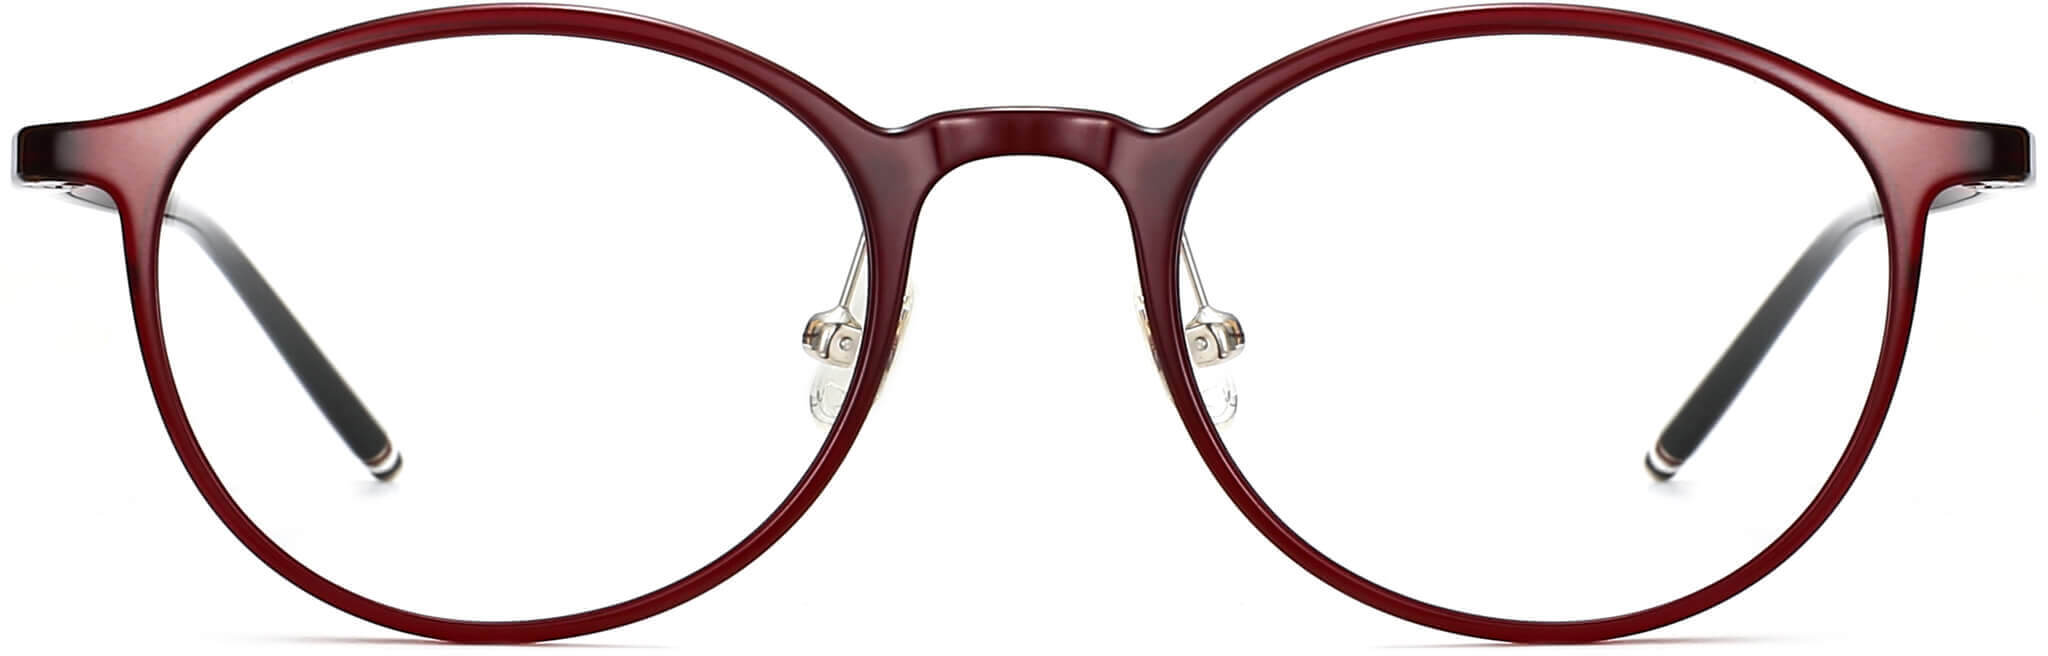 maron round red Eyeglasses from ANRRI, front view